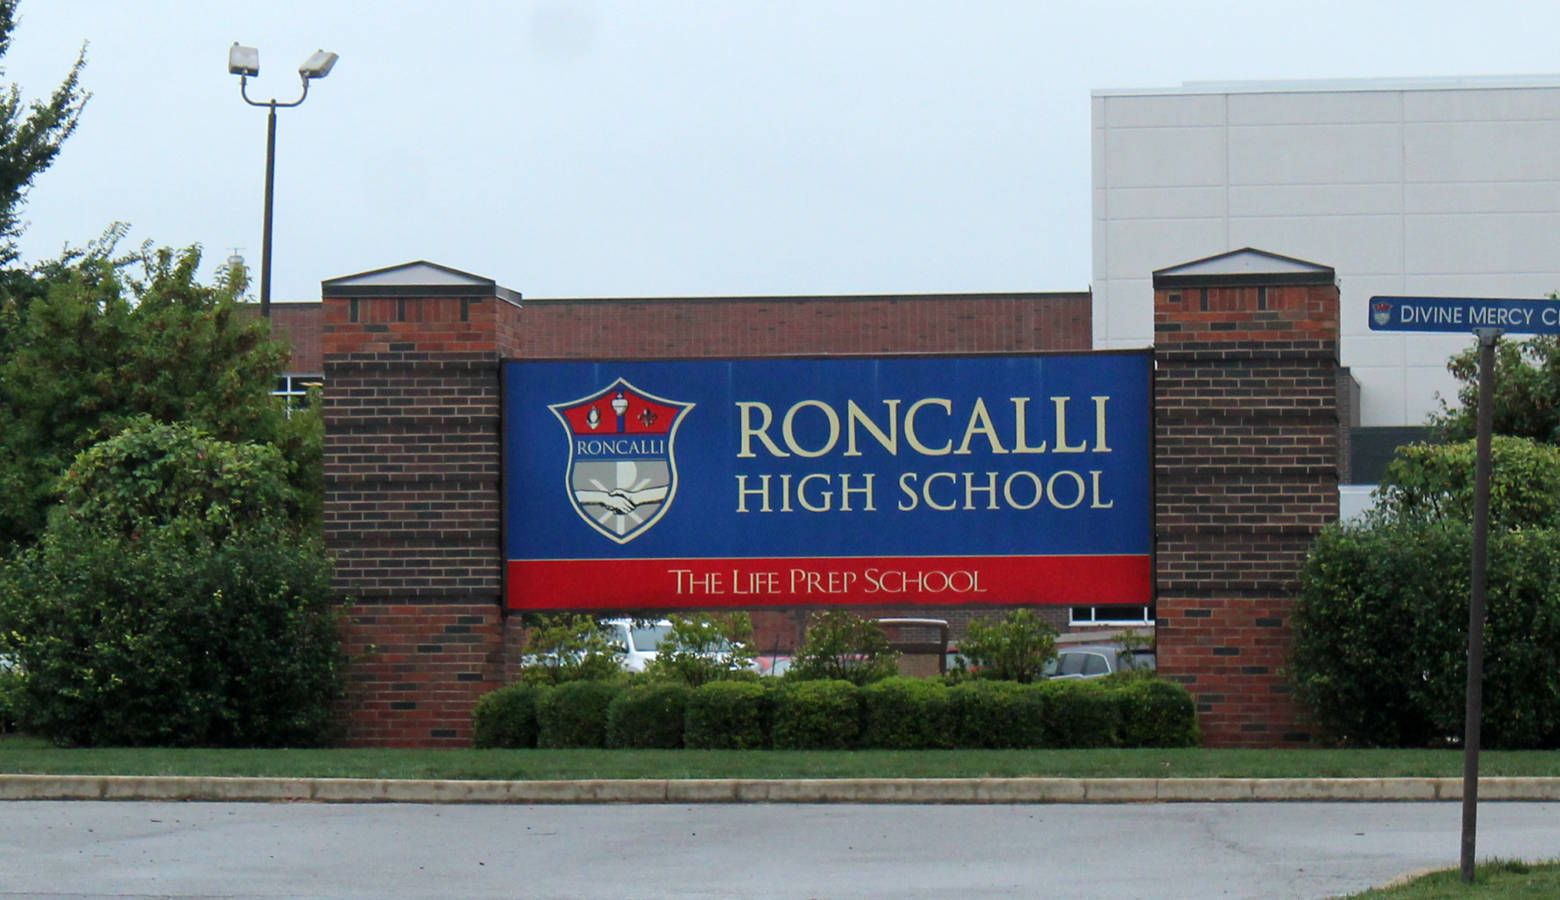 Roncalli High School is a private religious school and has received millions of dollars in funding through the state’s school voucher program. (Lauren Chapman/IPB News)